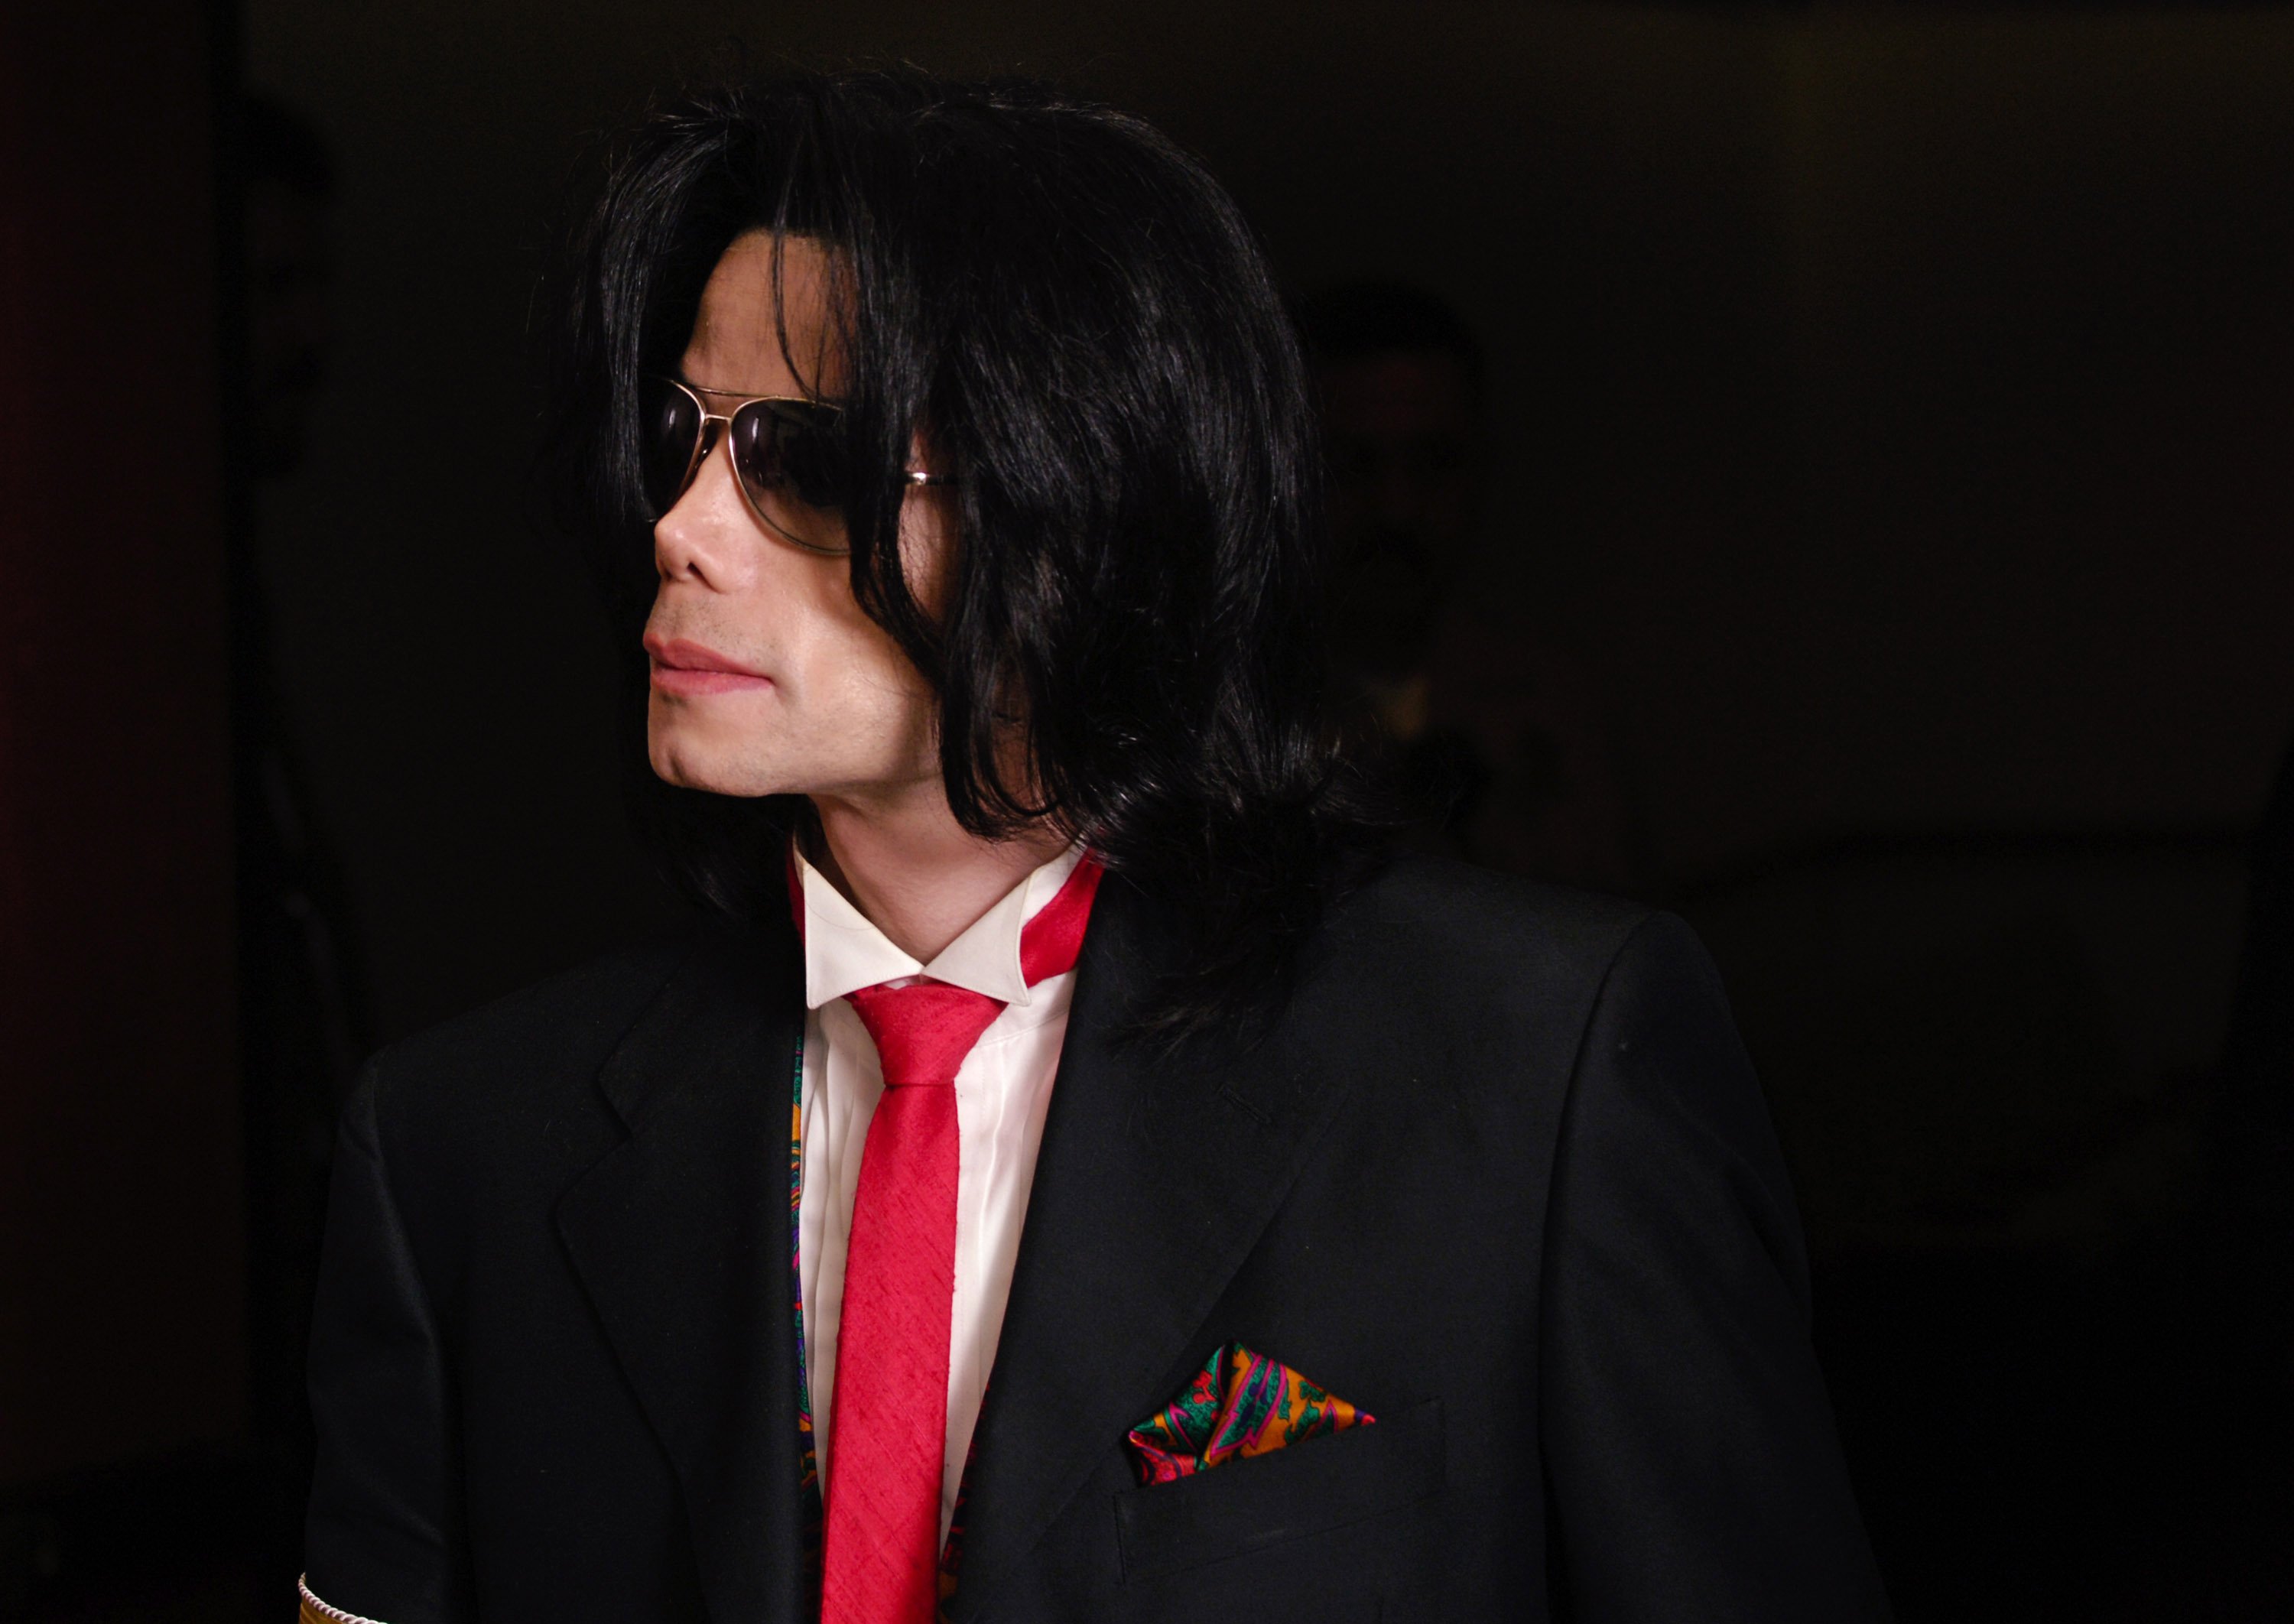 Michael Jackson leaves the courtroom after his child molestation trial at the Santa Barbara County Courthouse May 27, 2005. | Photo: GettyImages